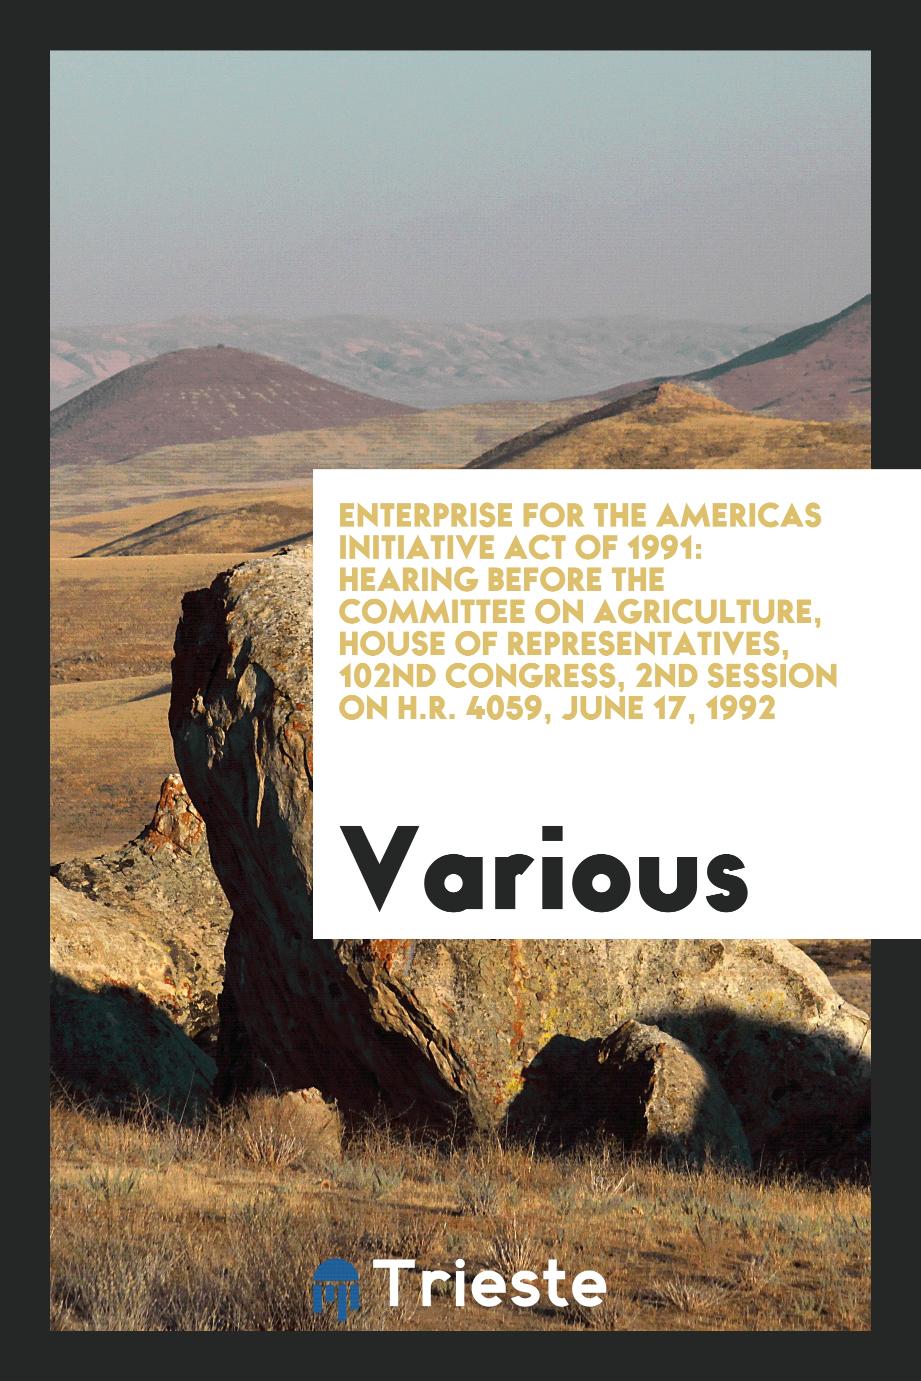 Enterprise for the Americas Initiative Act of 1991: Hearing Before the Committee on Agriculture, House of Representatives, 102nd Congress, 2nd Session on H.R. 4059, June 17, 1992